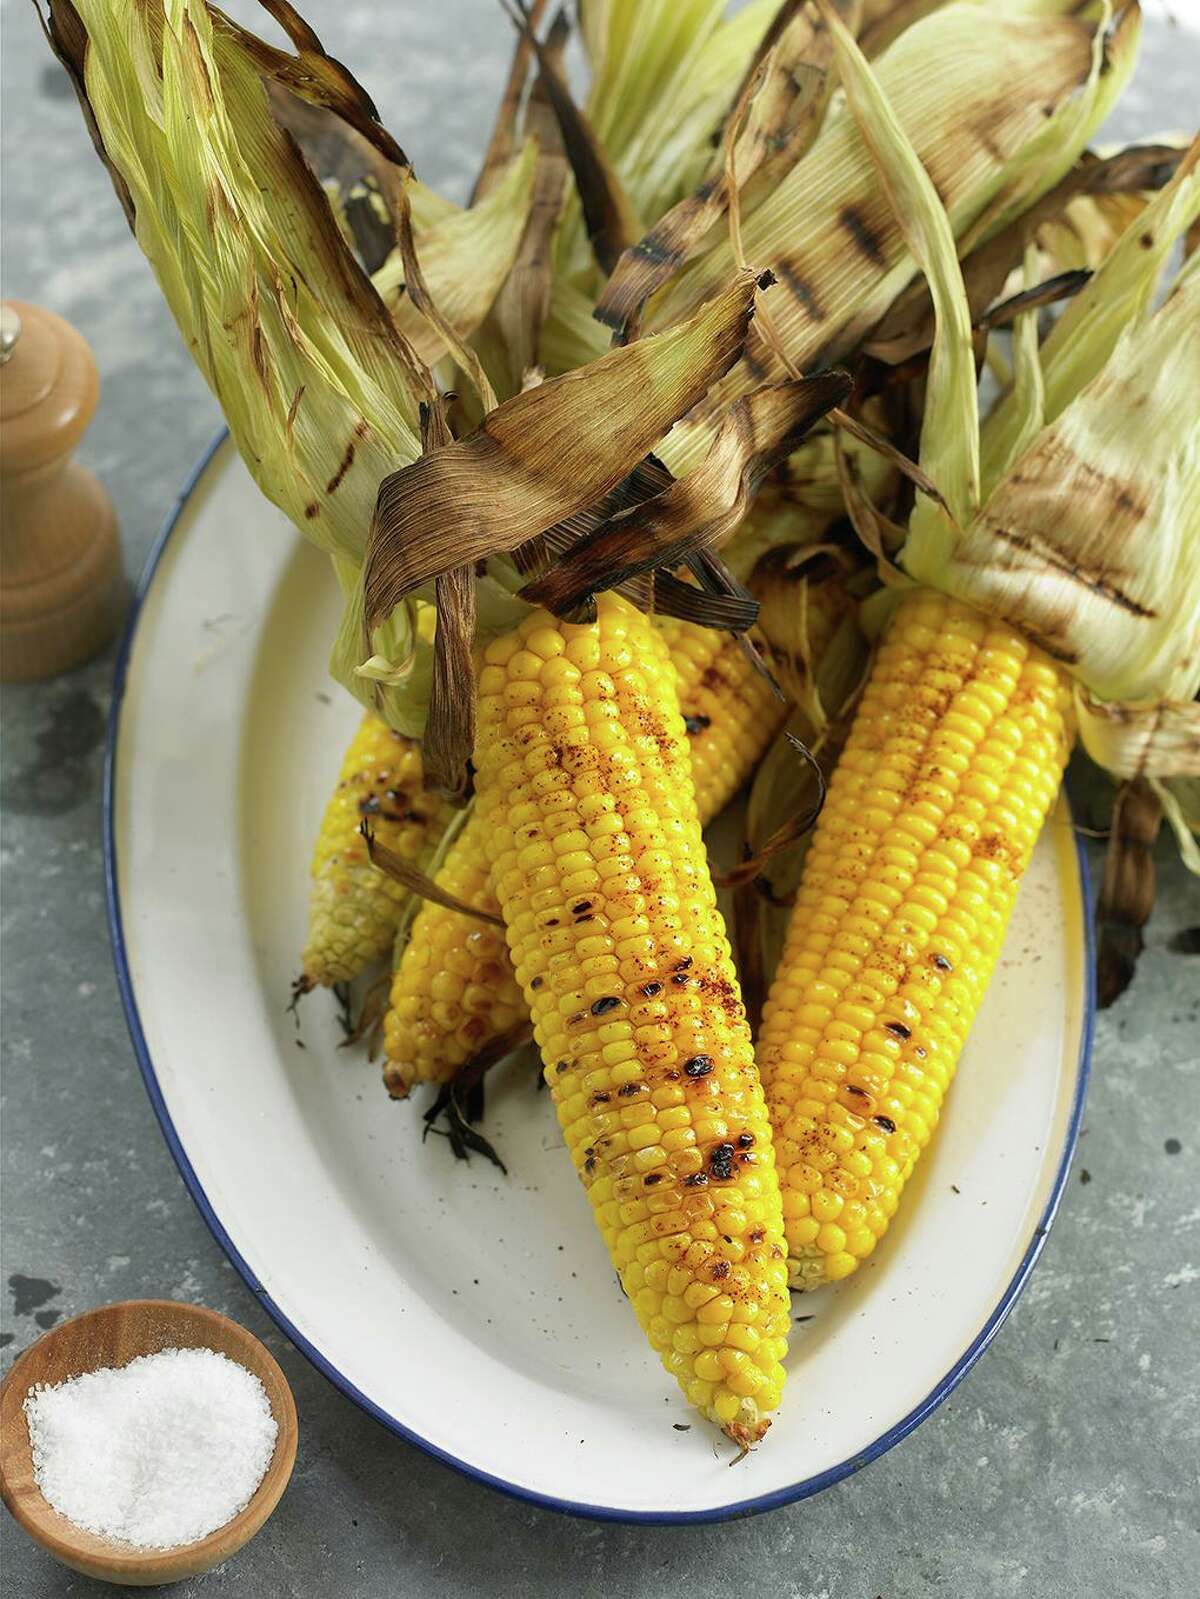 For the best flavor, grill whole ears of sweet corn with the husks on for about 20 minutes over medium heat.